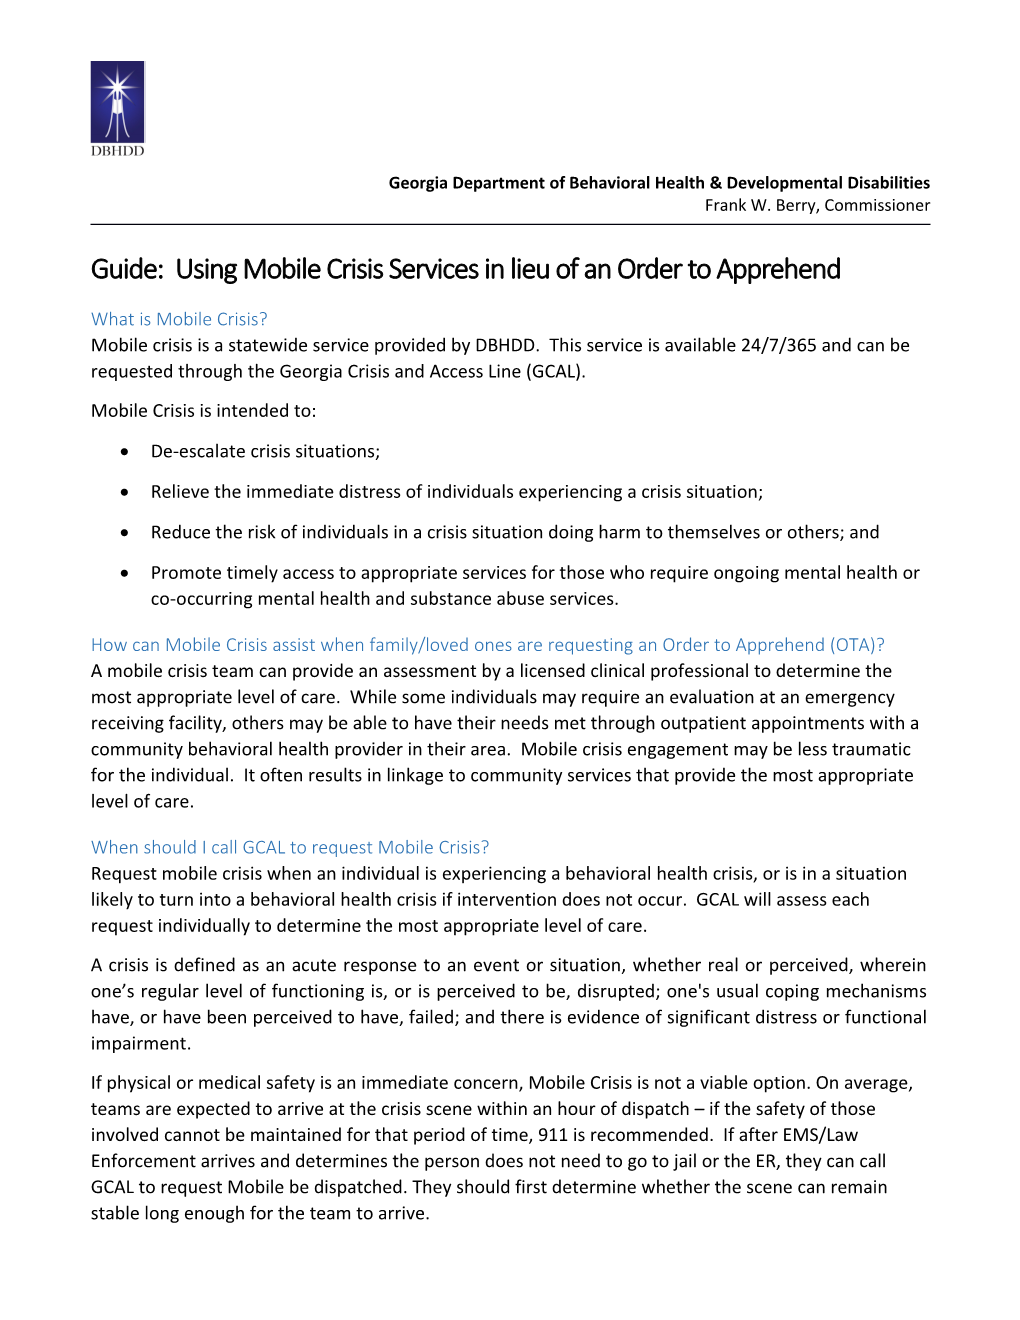 Guide: Using Mobile Crisis Services in Lieu of an Order to Apprehend